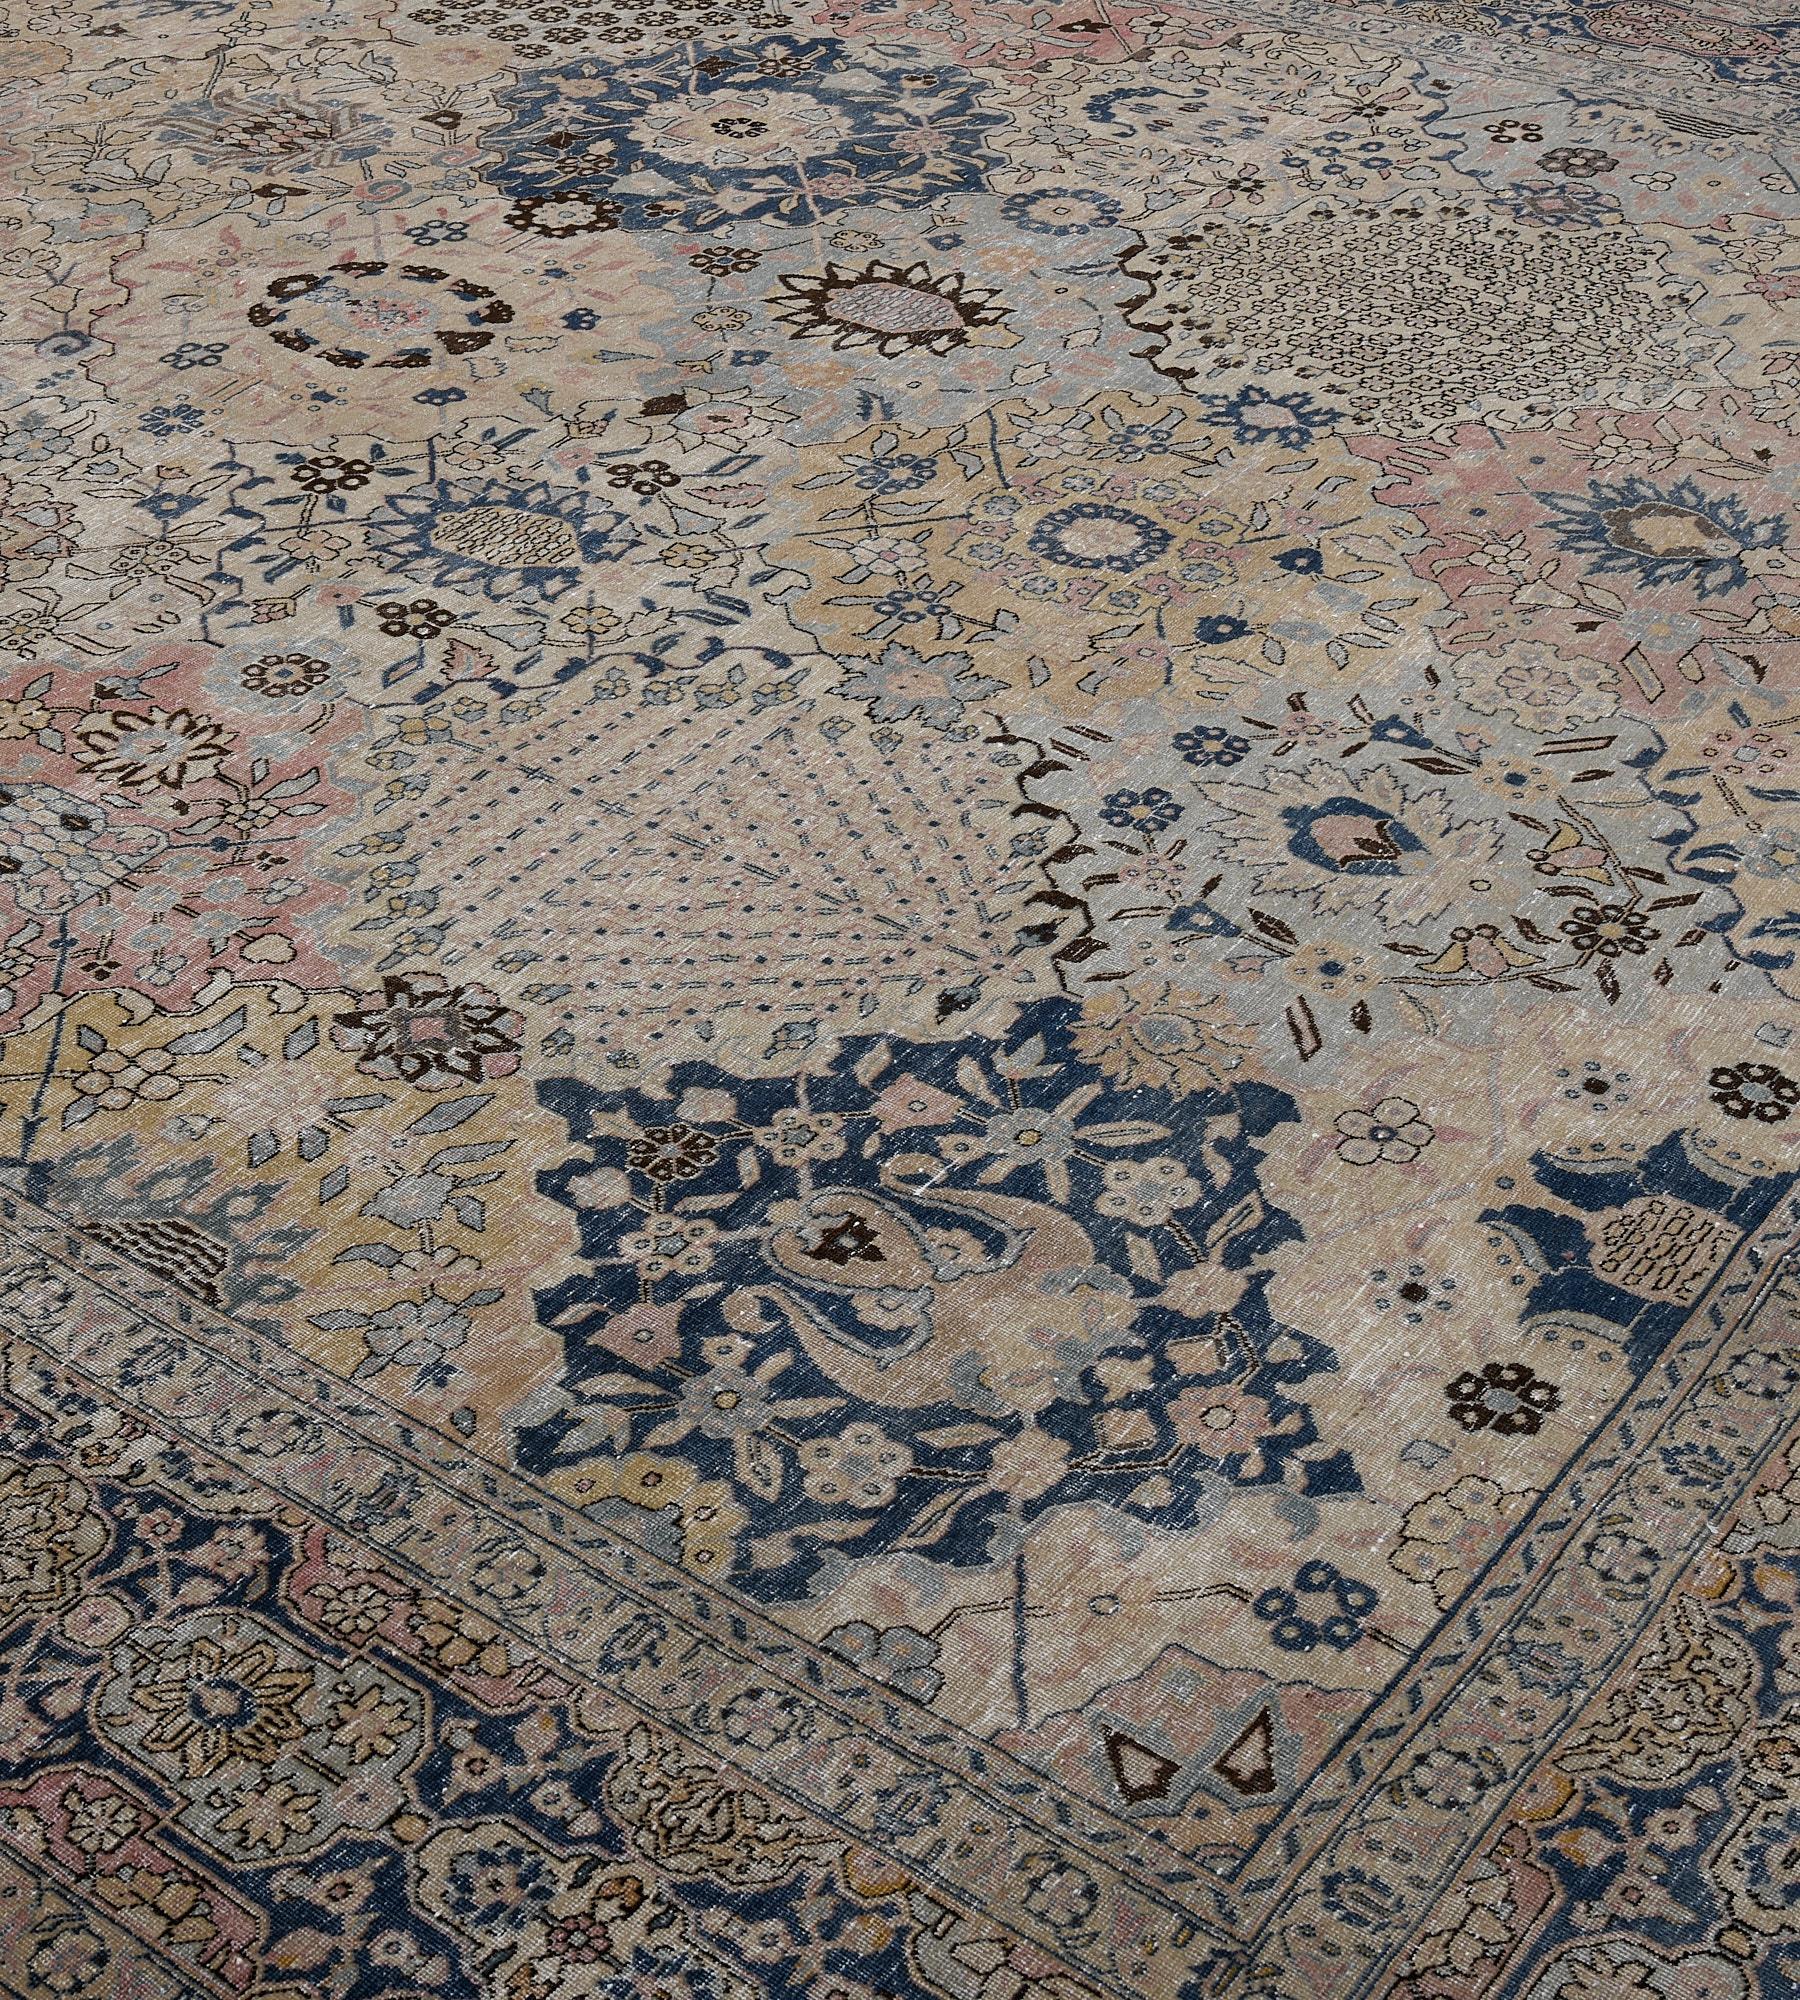 This antique, Circa 1920, Tabriz rug features a field with diagonal rows of bold polychrome cusped lozenges each containing dense floral sprays alternating with central palmettes issuing angular floral vine, in a broad indigo border with linked